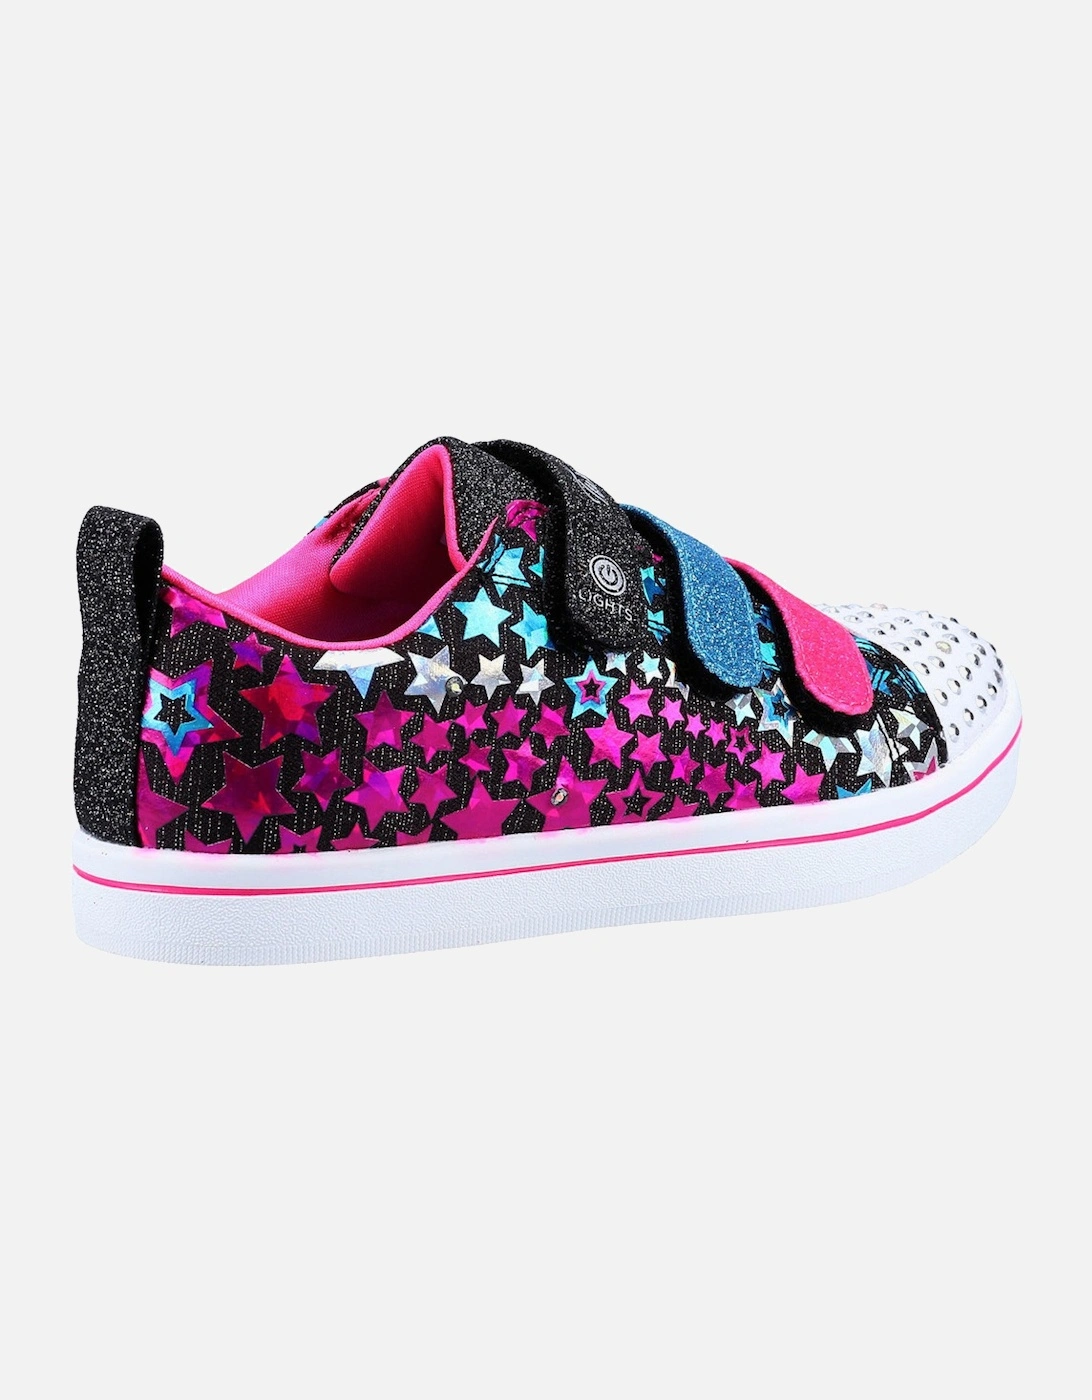 Girls Twinkle Toes Sparkle Rayz Star Blast Shoes